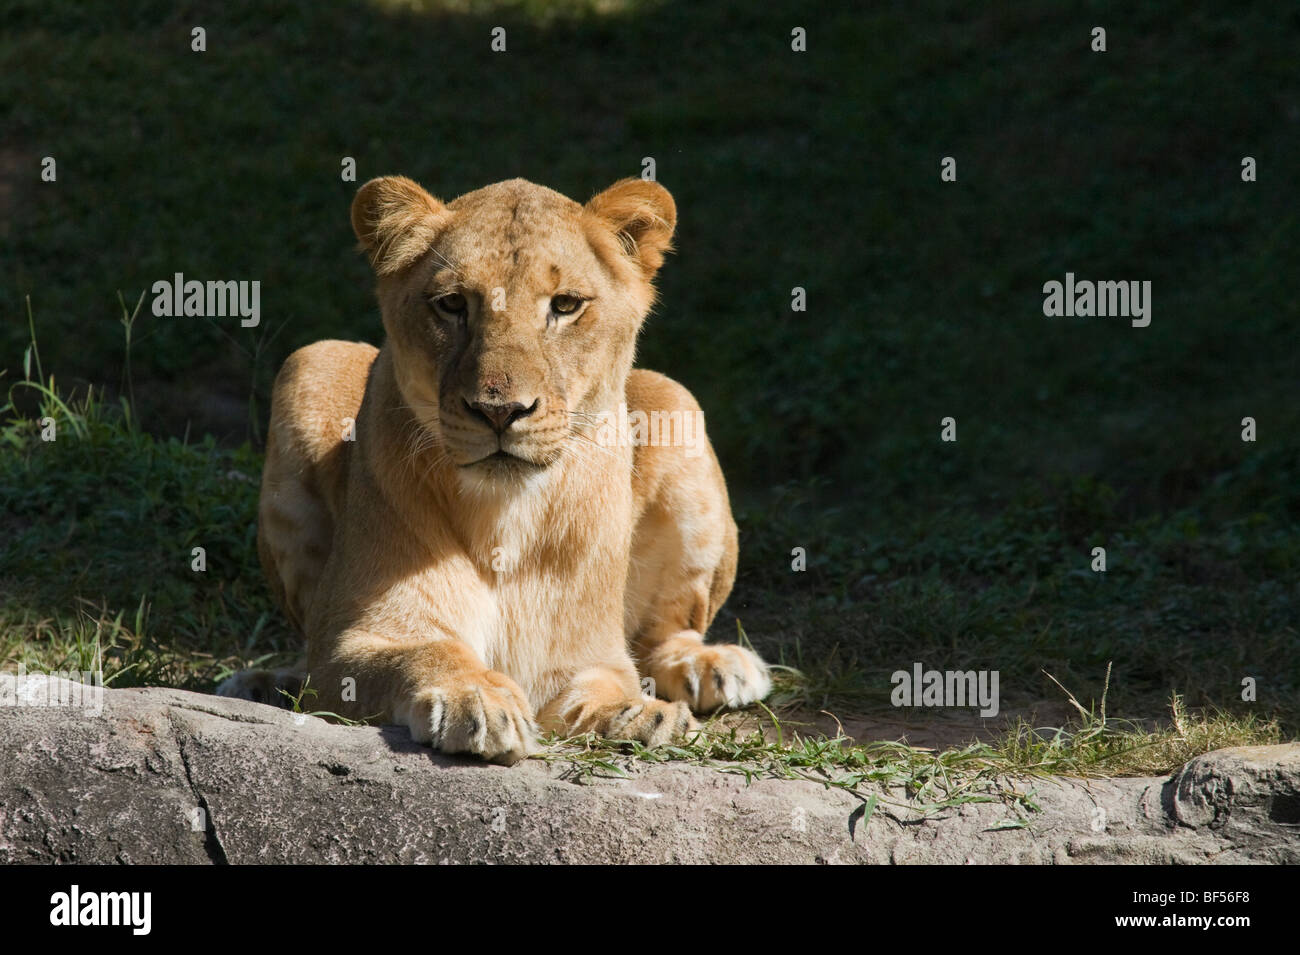 Young lioness (Panthera leo) looking straight at the camera, Edge of Africa, Busch Gardens, Tampa, Florida, USA Stock Photo